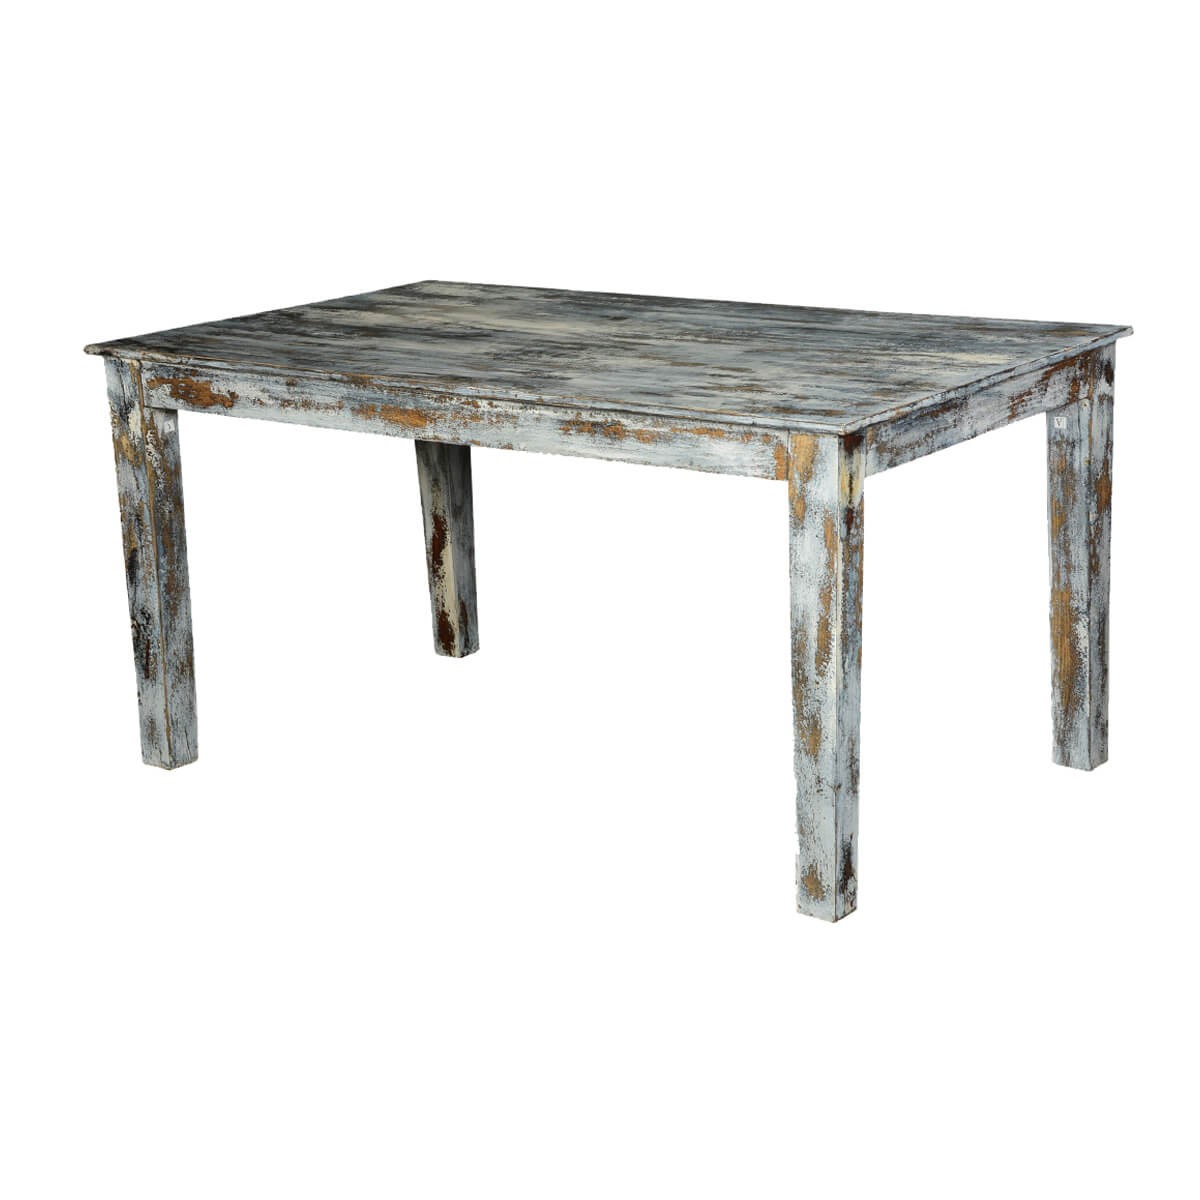 Grey speckled distressed wood kitchen dining table 2